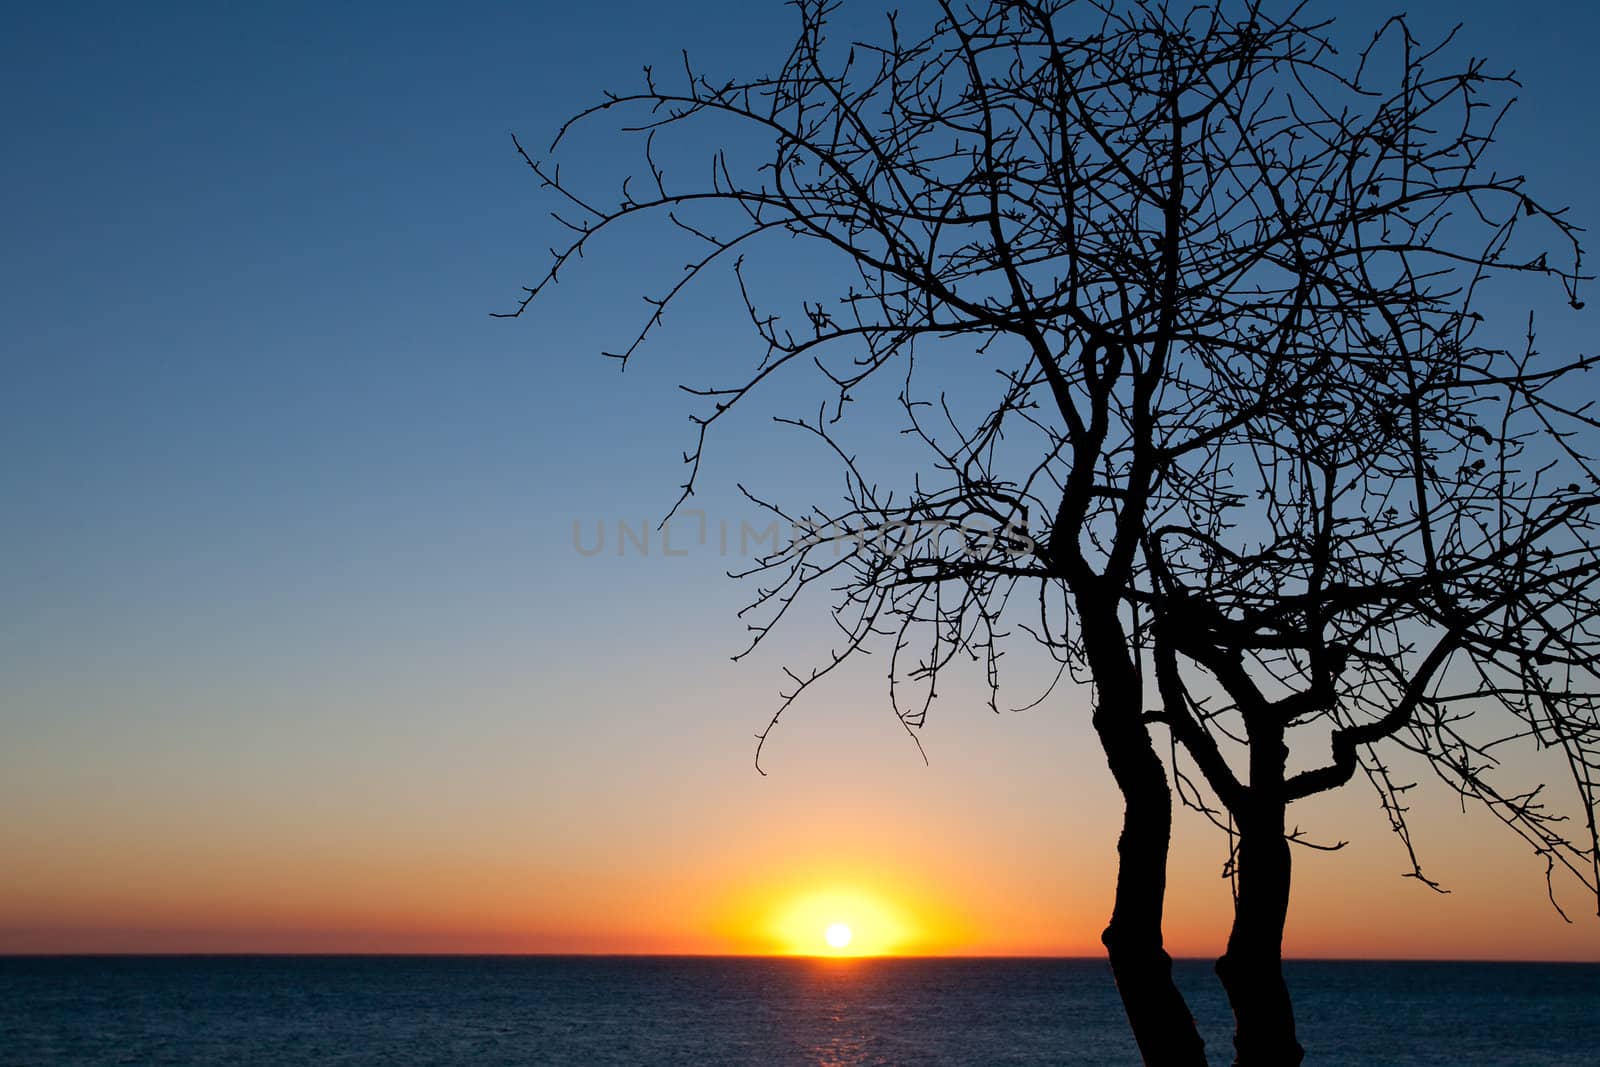 Sunset at the seaside with a tree silhouette